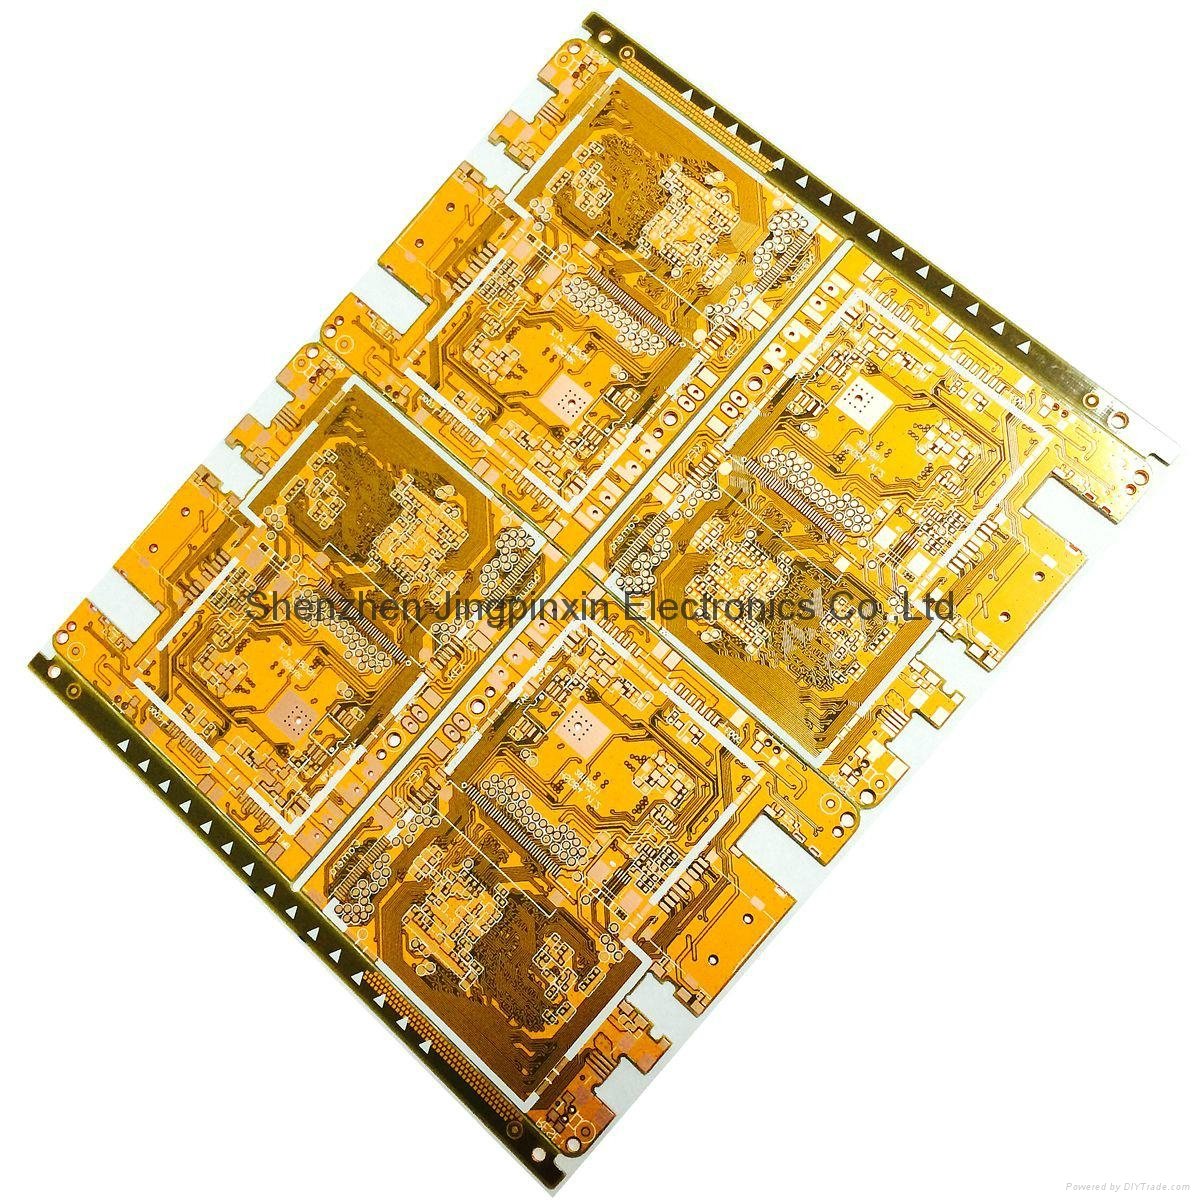 With UL Approval Printed Circuit Board